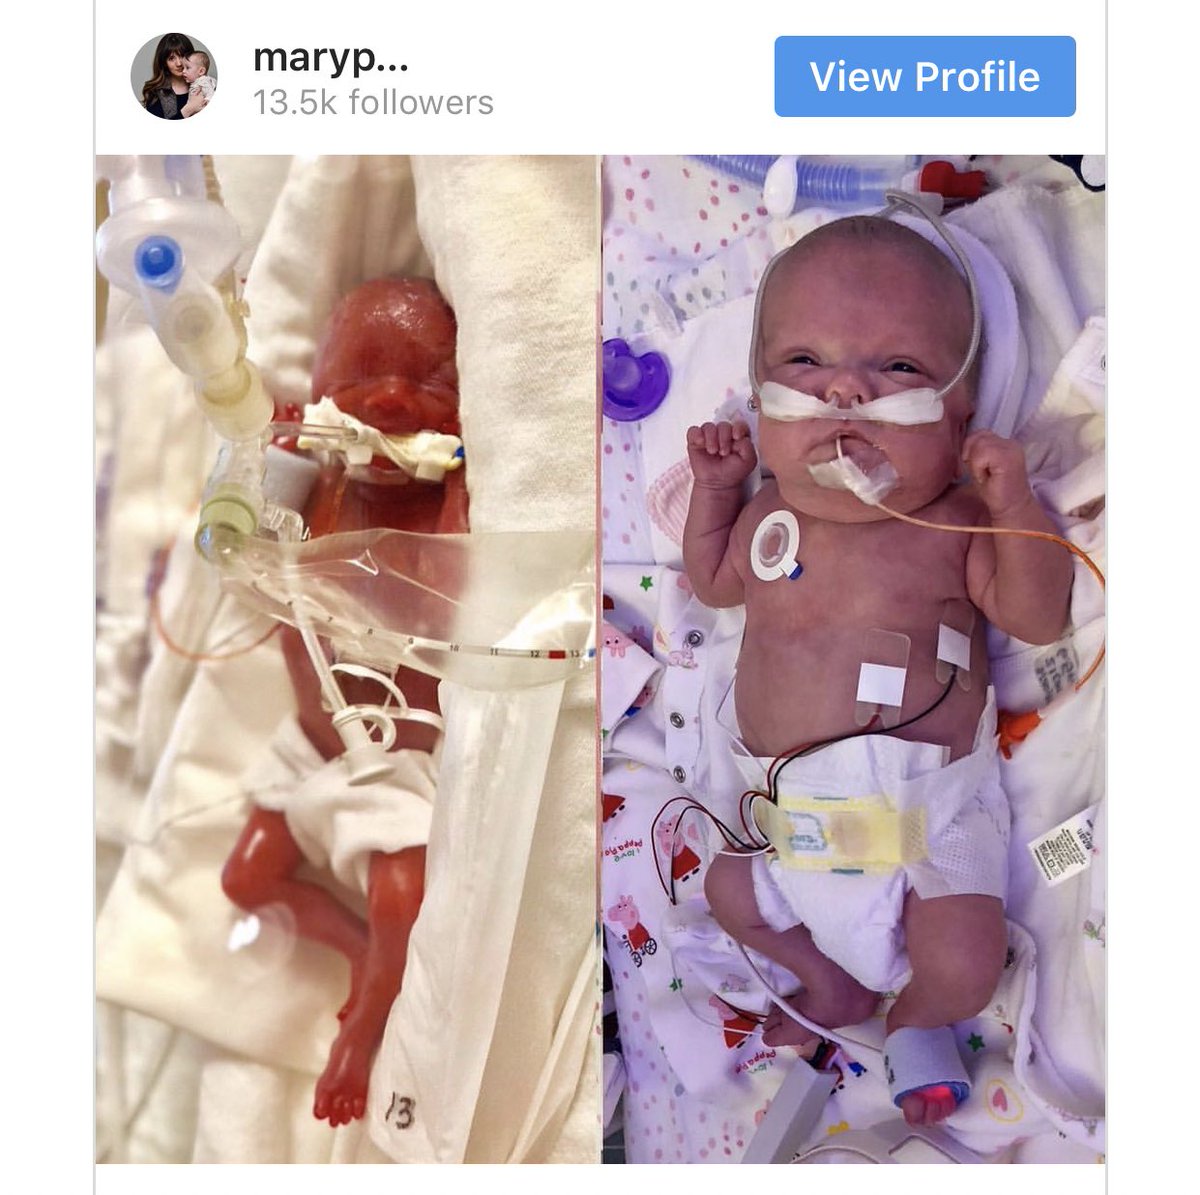 Baby Grace was born at 23 weeks and weighed 1 pound.  https://www.independent.co.uk/life-style/health-and-families/baby-premature-transformation-23-weeks-pregnant-mary-parkins-grace-a8289096.html